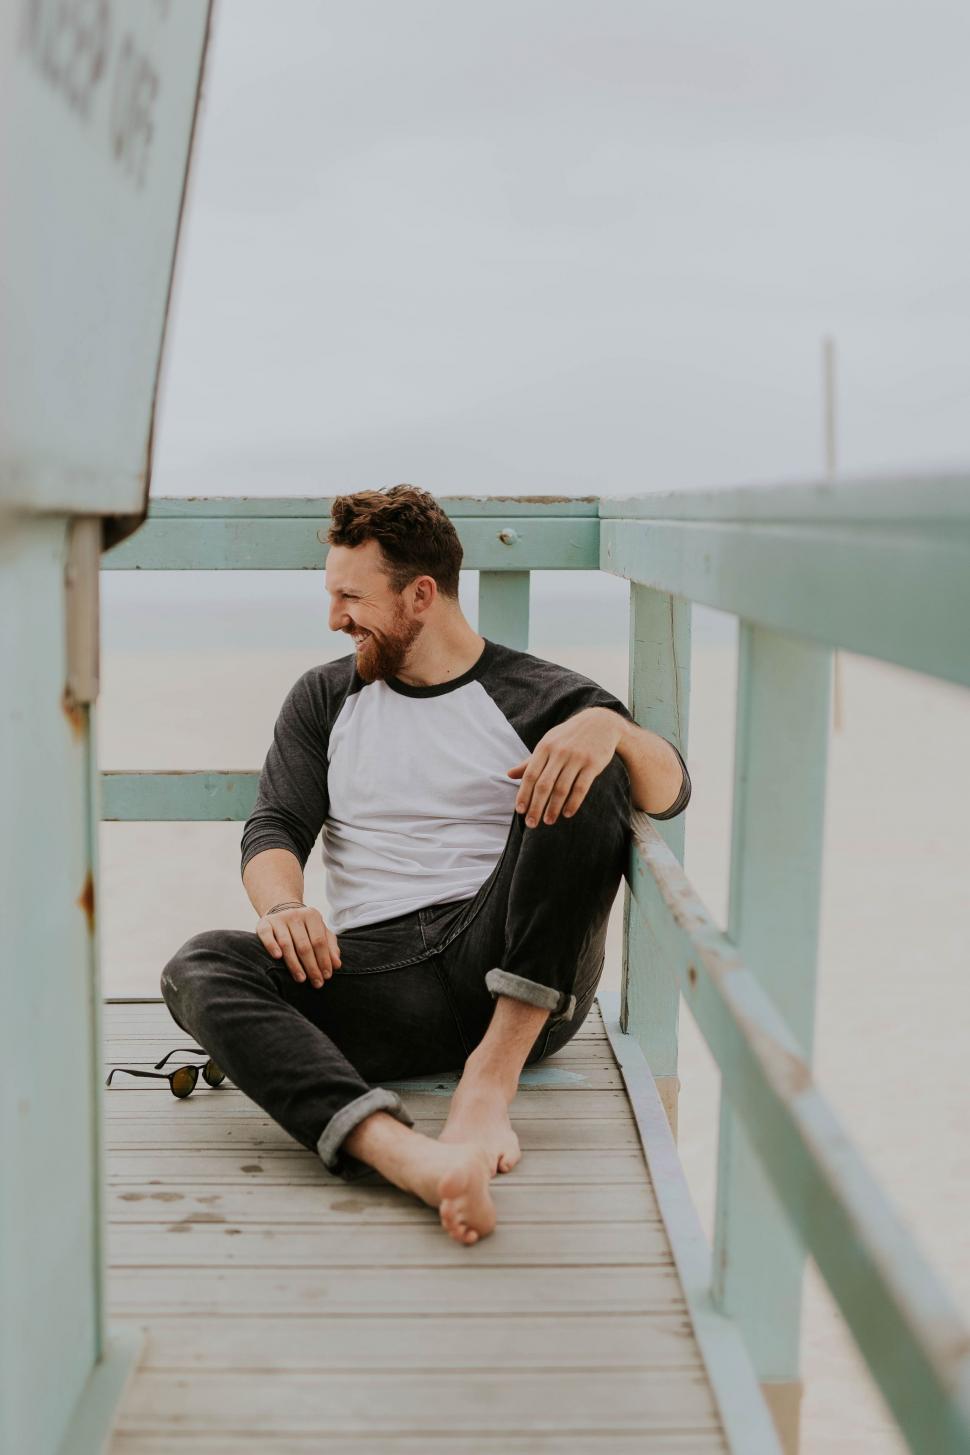 Free Image of Man Sitting on Dock With Crossed Legs 